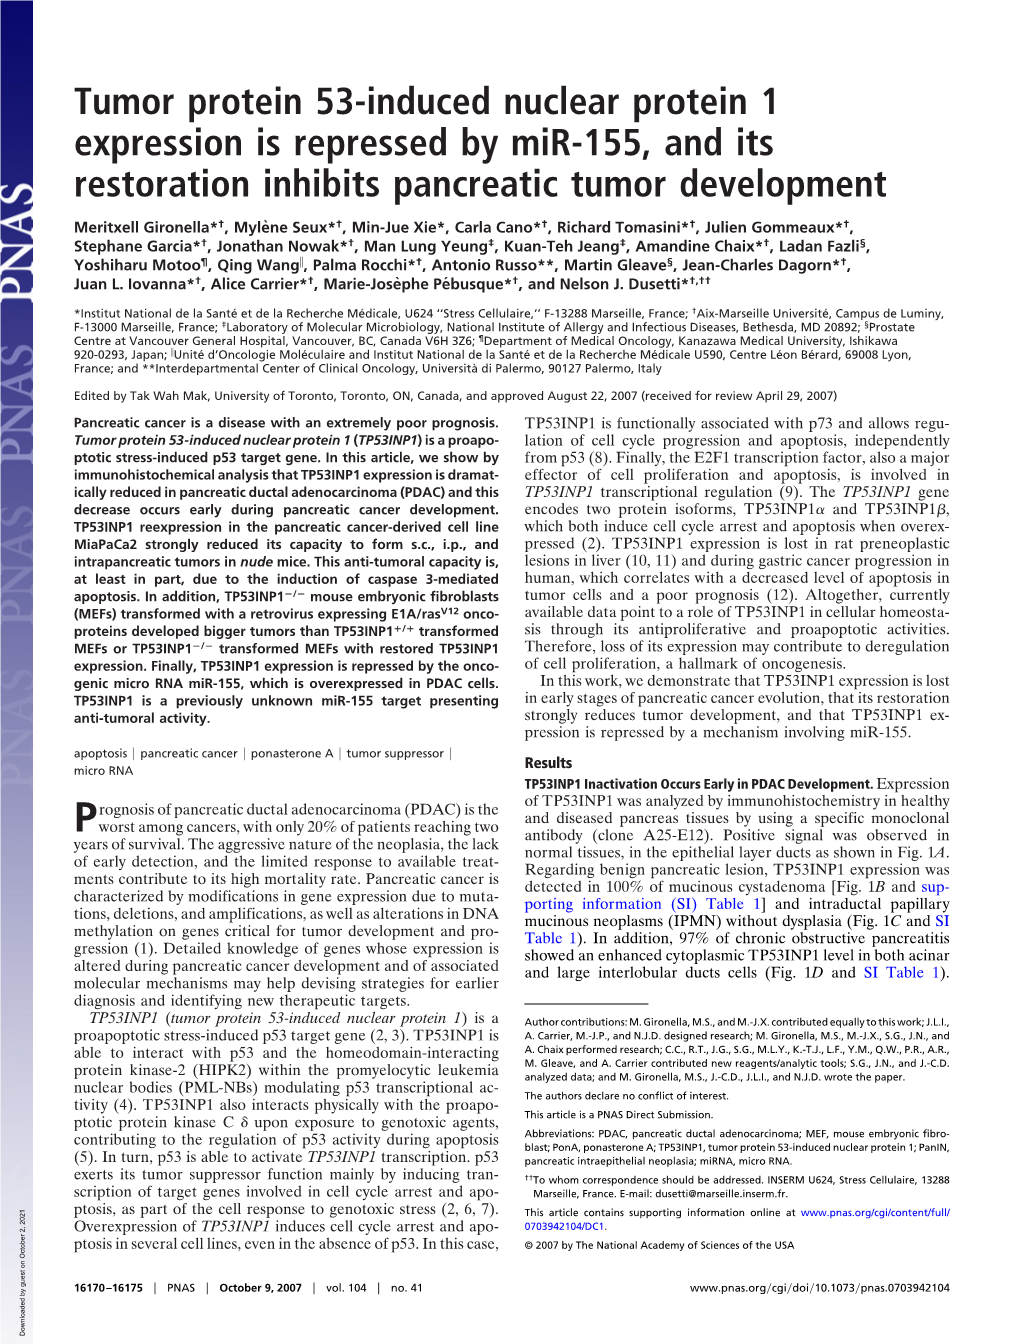 Tumor Protein 53-Induced Nuclear Protein 1 Expression Is Repressed by Mir-155, and Its Restoration Inhibits Pancreatic Tumor Development